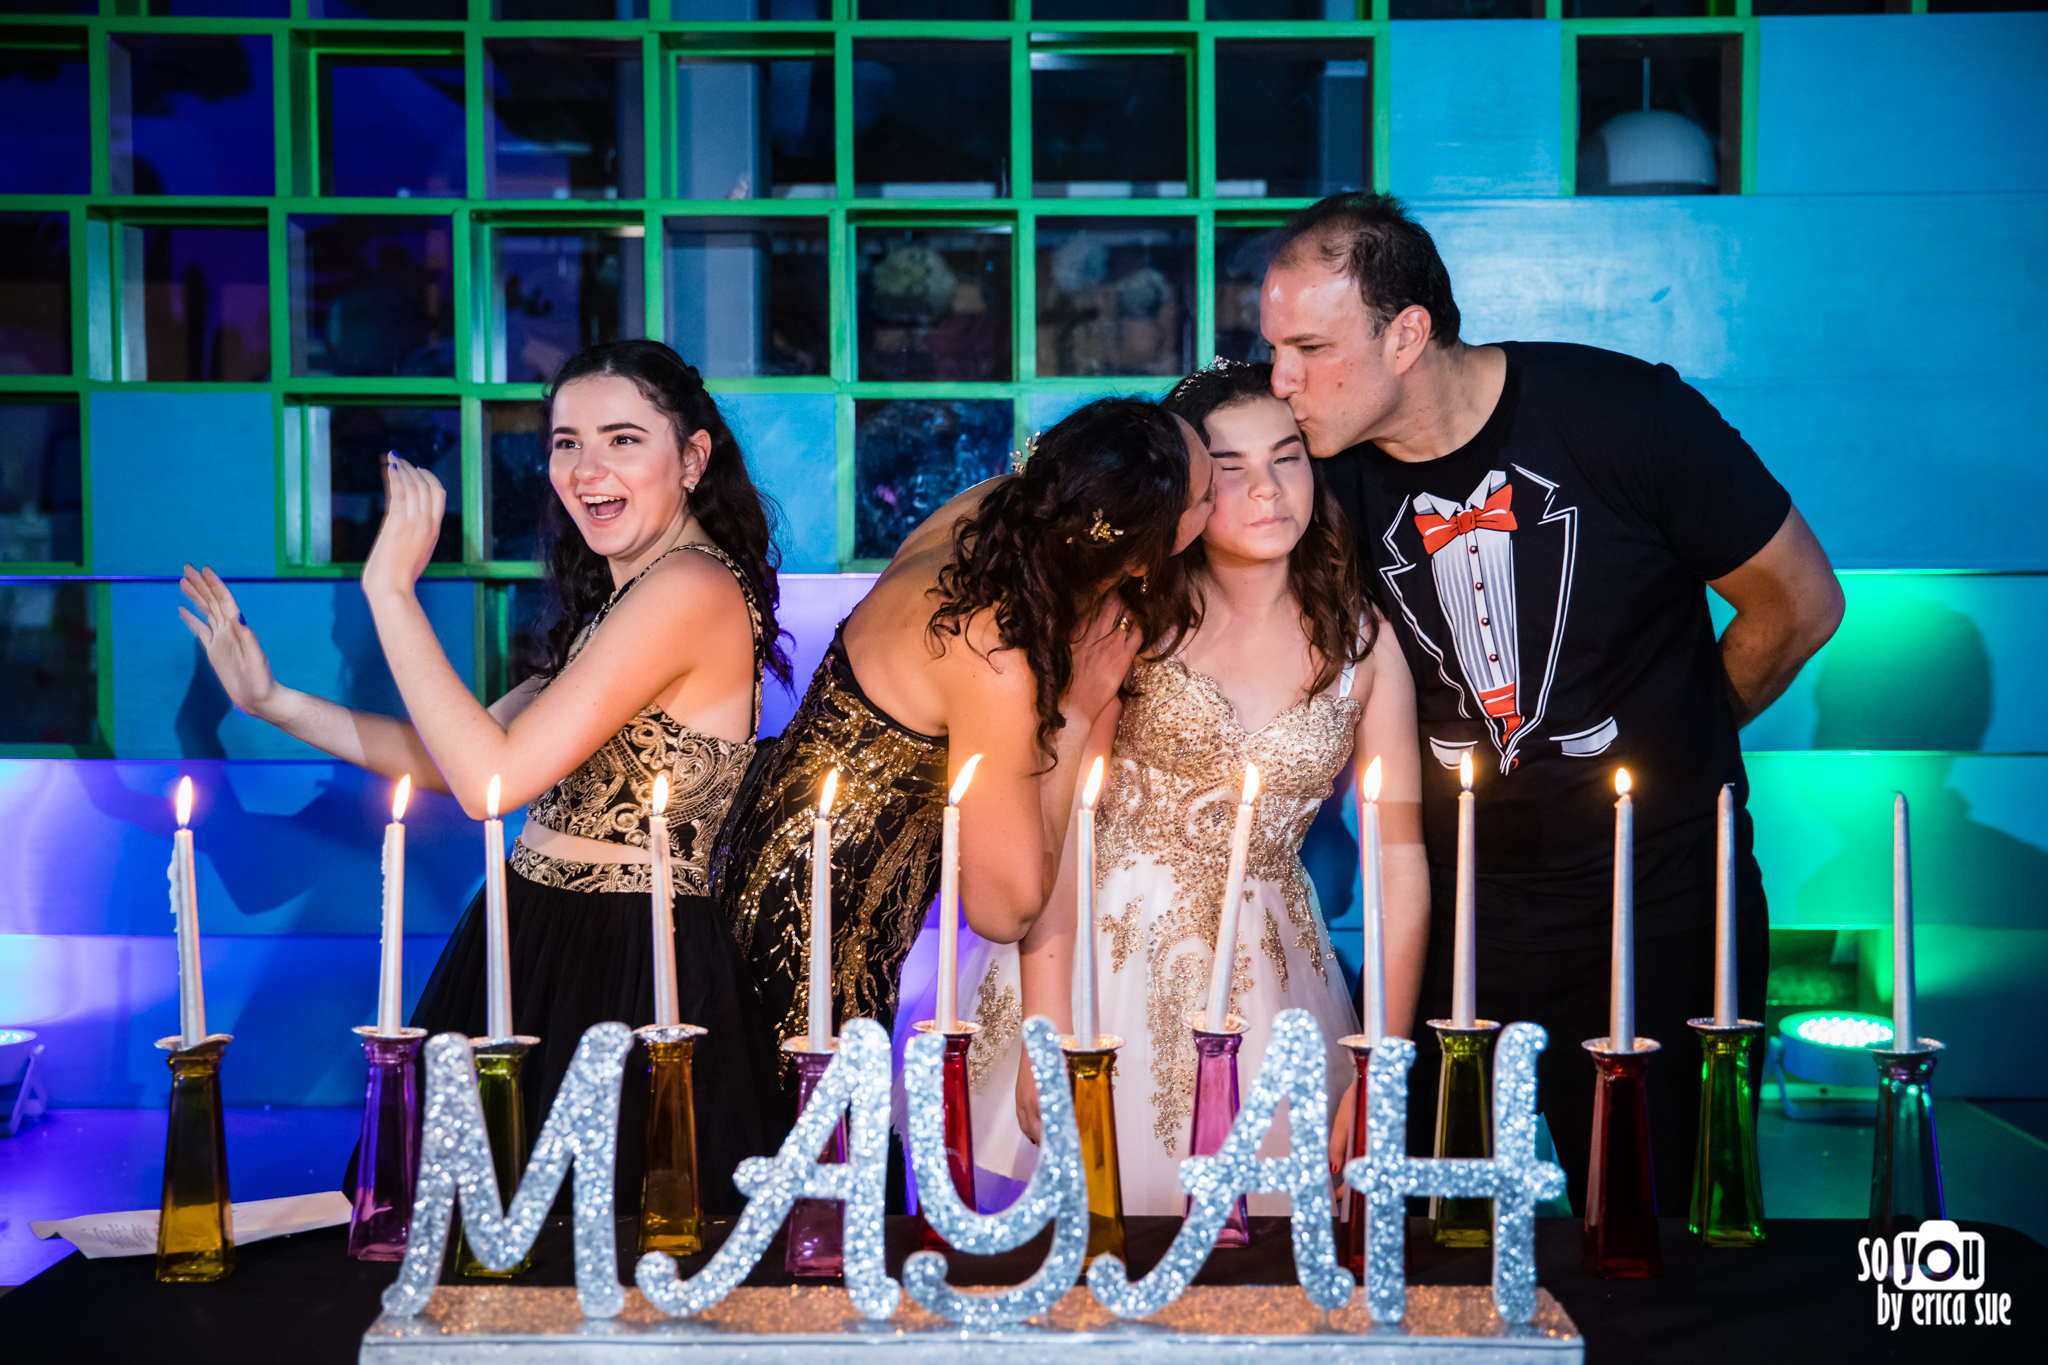 so-you-by-erica-sue-bar-bat-mitzvah-young-at-art-davie-fl-photography-5404.jpg